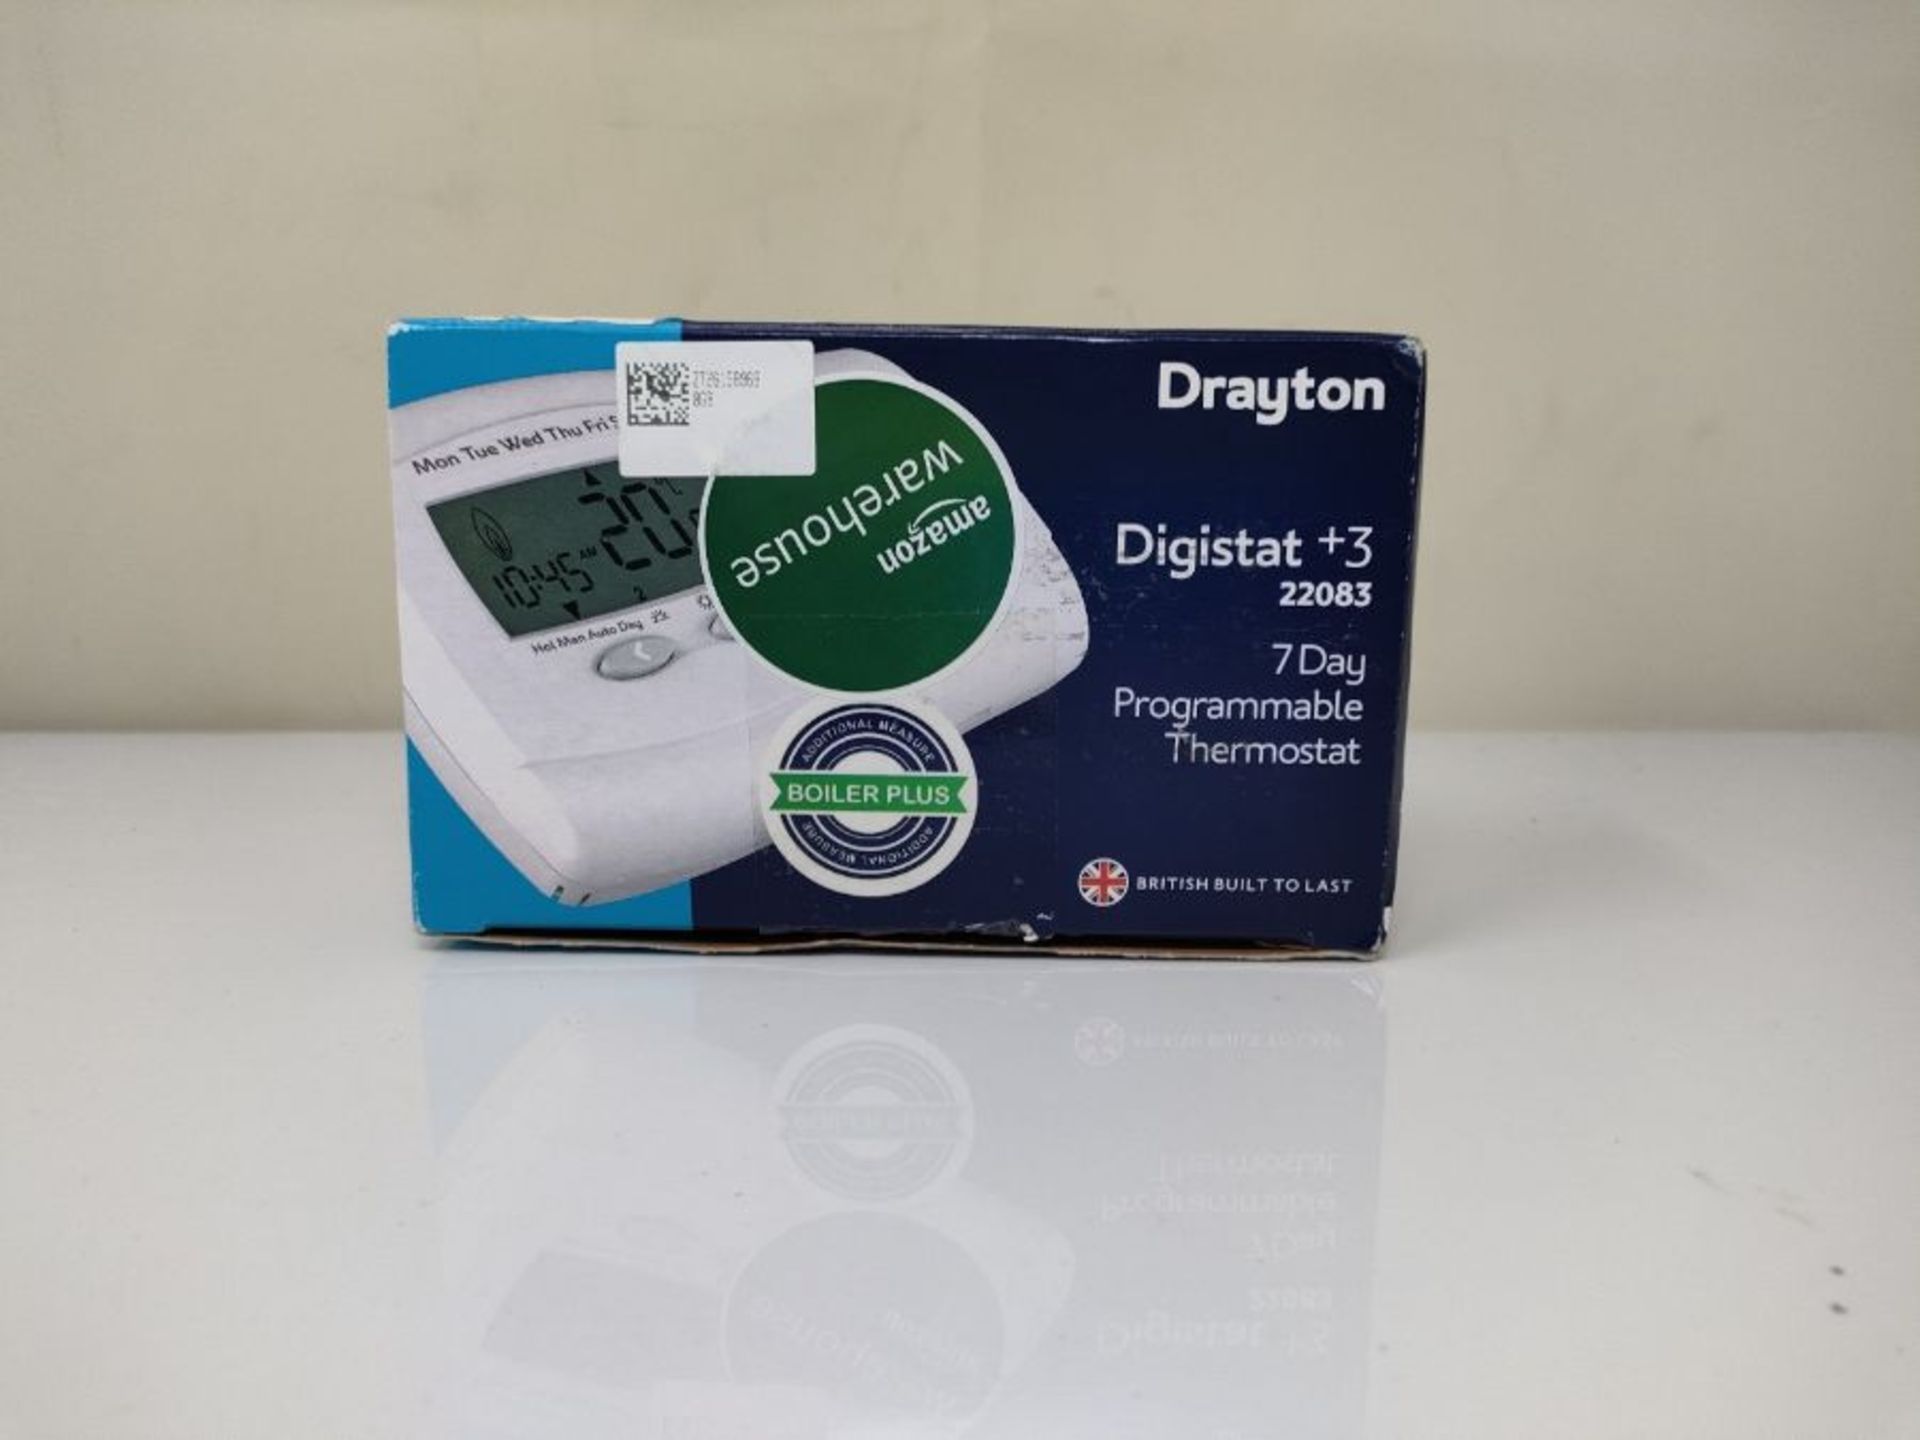 Drayton DIGISTAT +3 22083 7 Day PROGRAMMABLE Room Thermostat - Image 2 of 3